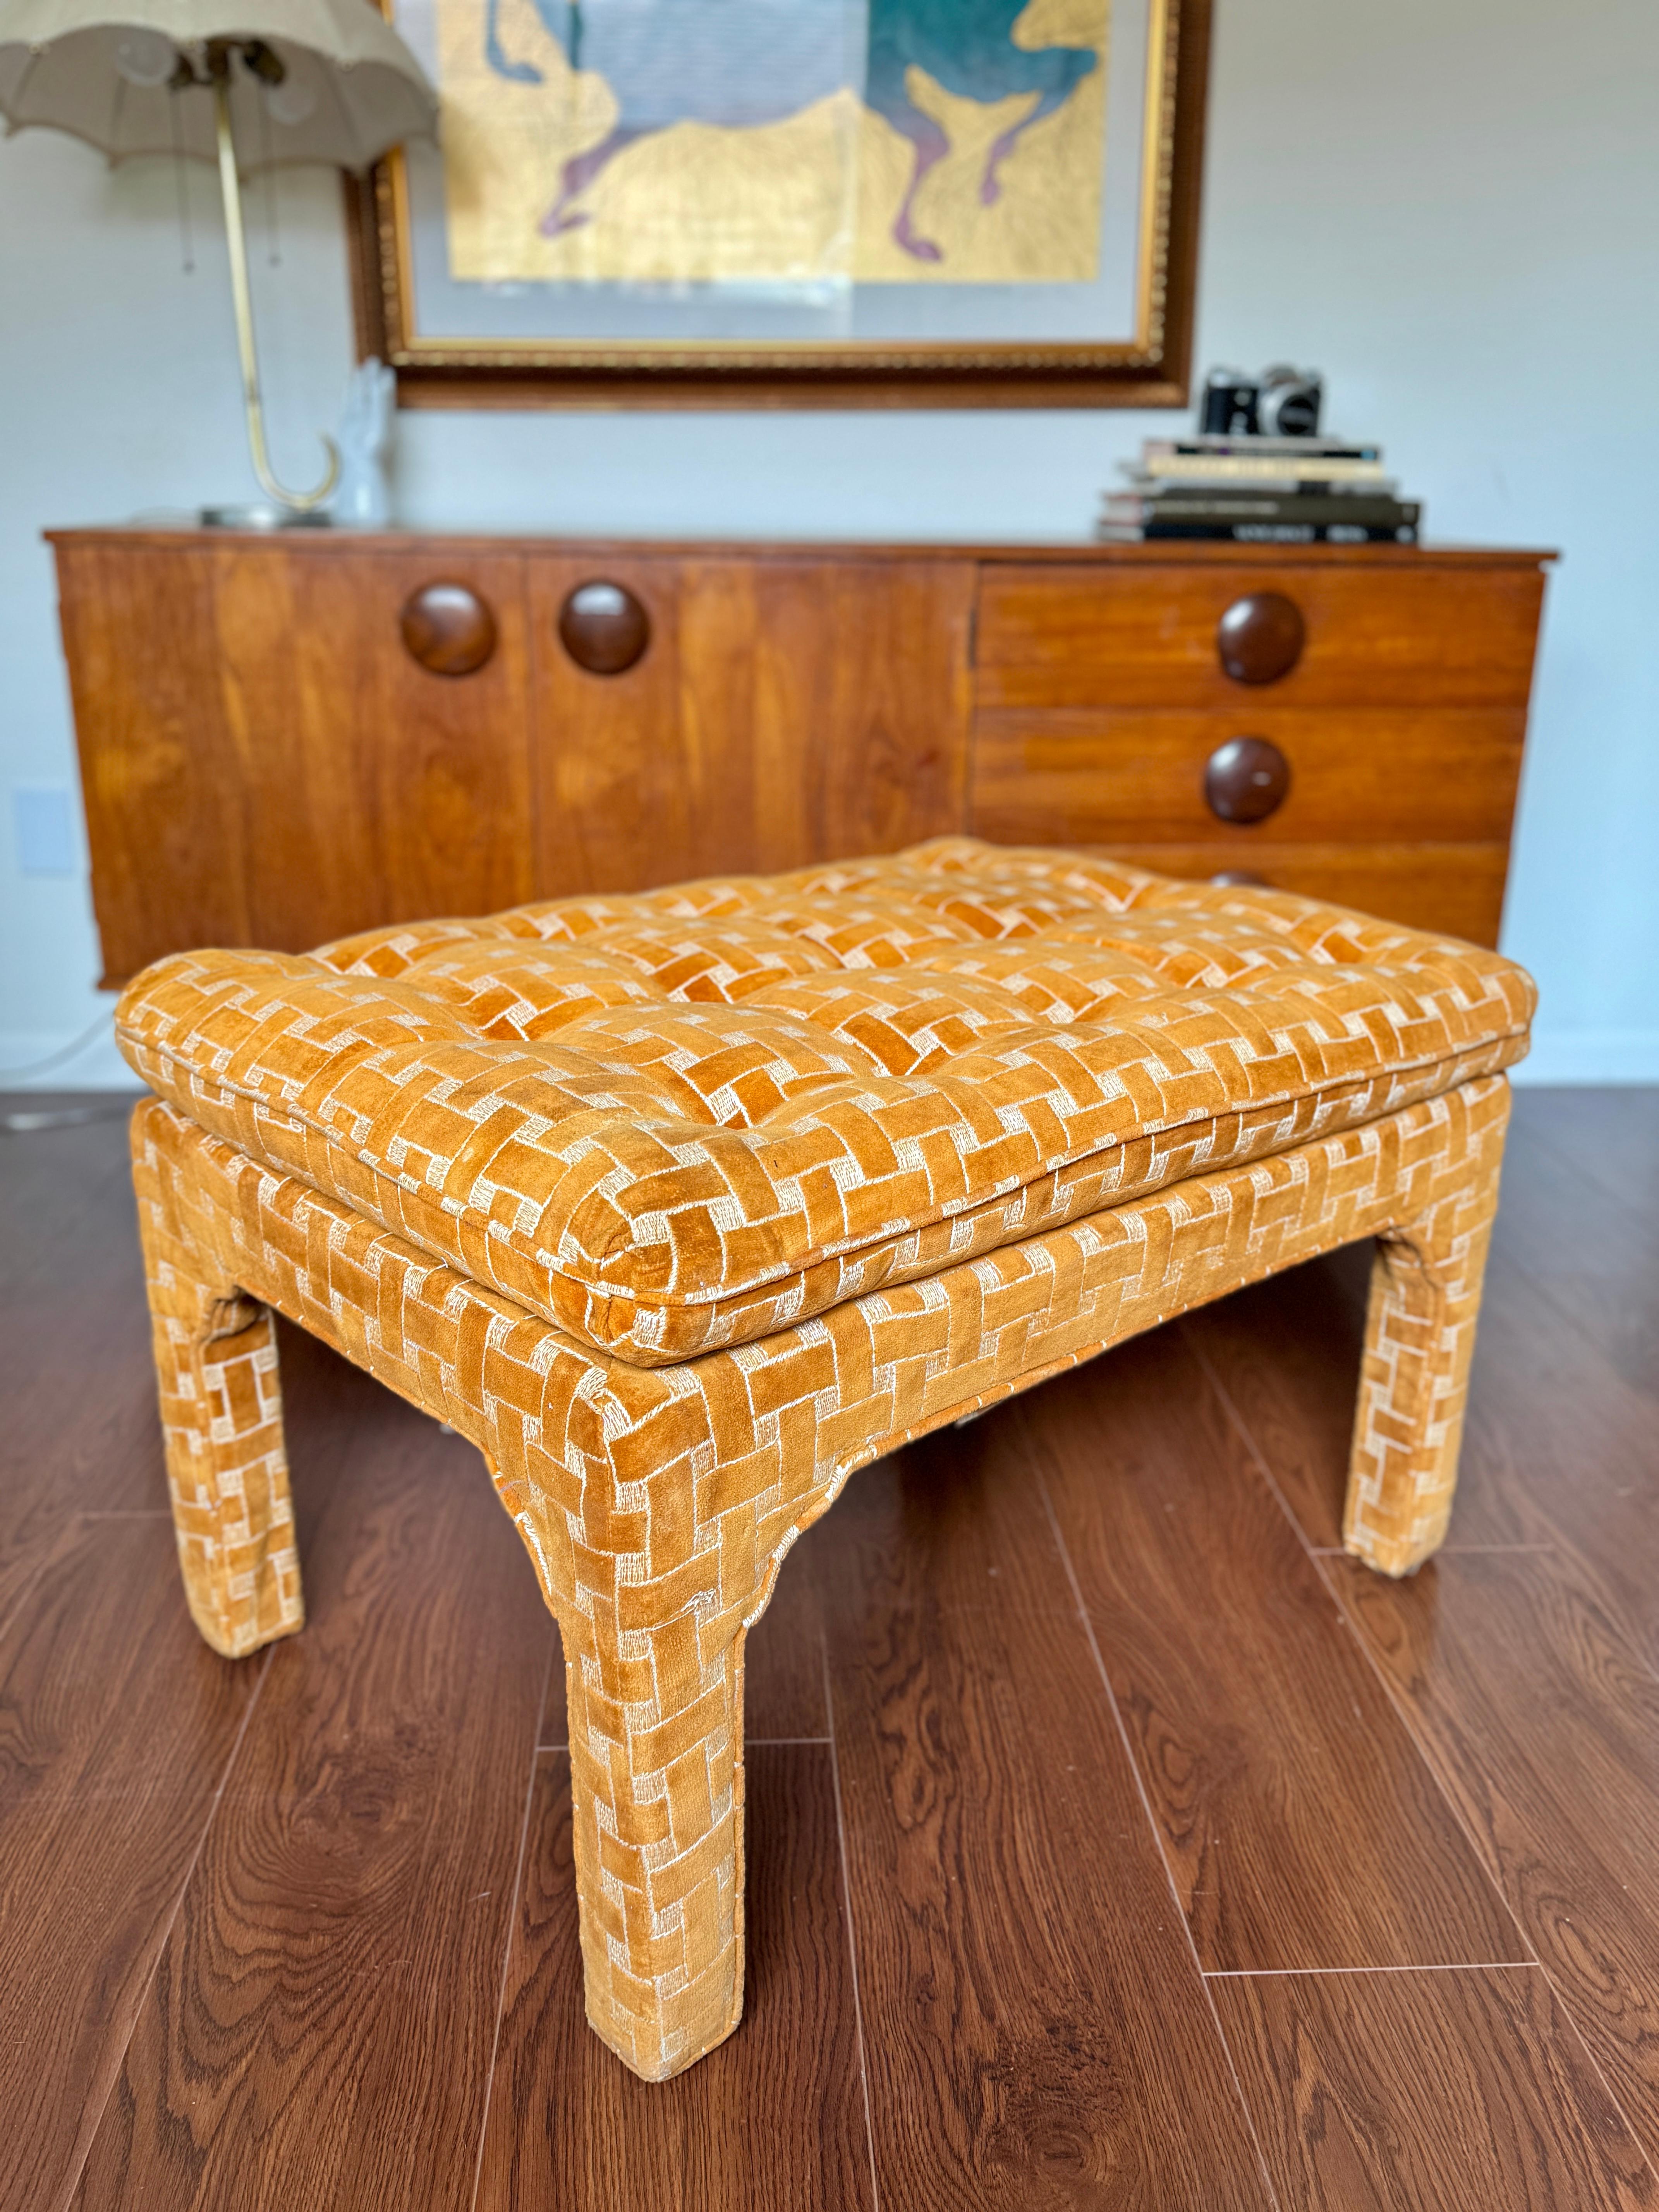 A parson style upholstered bench in the style of Milo Baughman, circa 1970s. This bench has a buttoned pillow top with upholstered legs featuring the original orange and white basket weave cut velvet upholstery. In good original condition with no